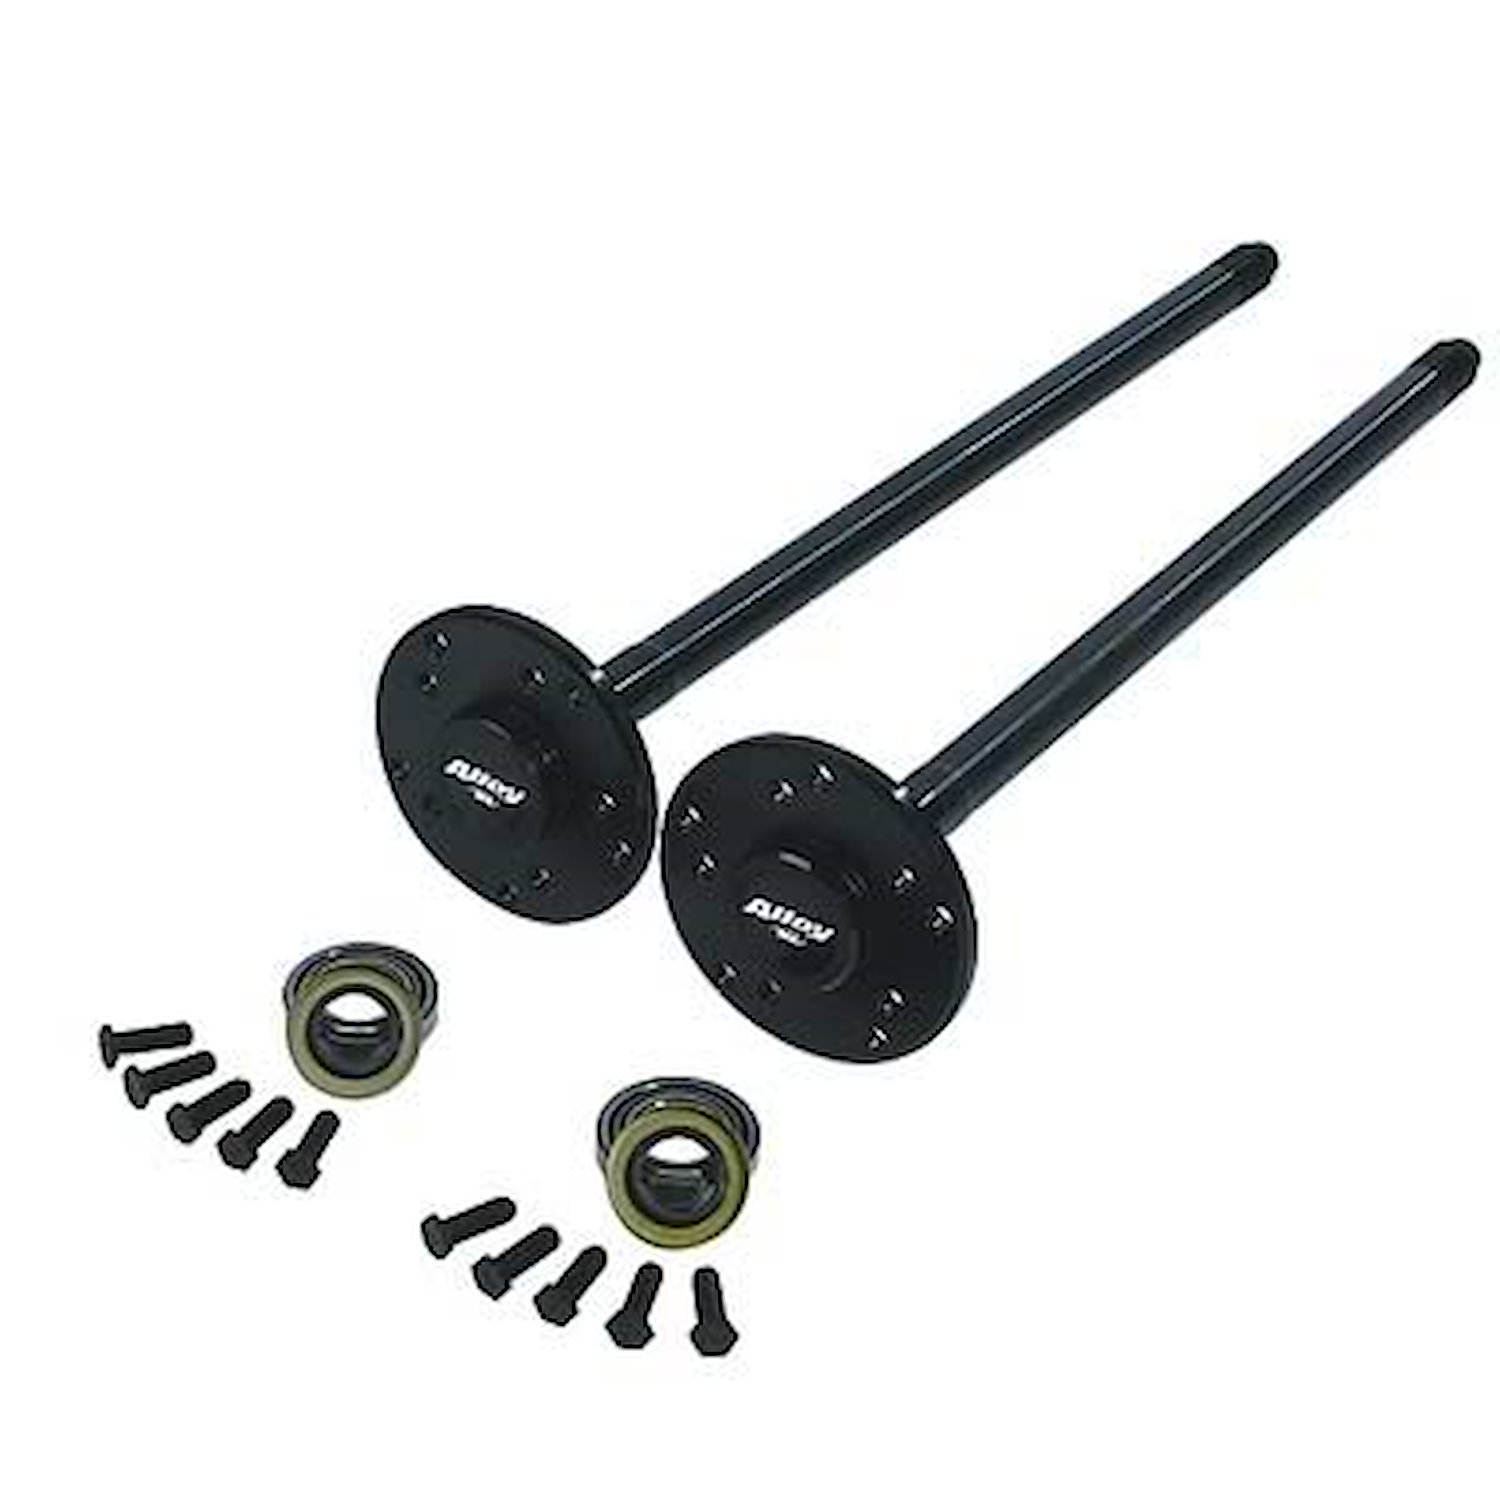 Ford 8.8" Performance Rear Axle Kit 1979-93 Mustang 5-lug